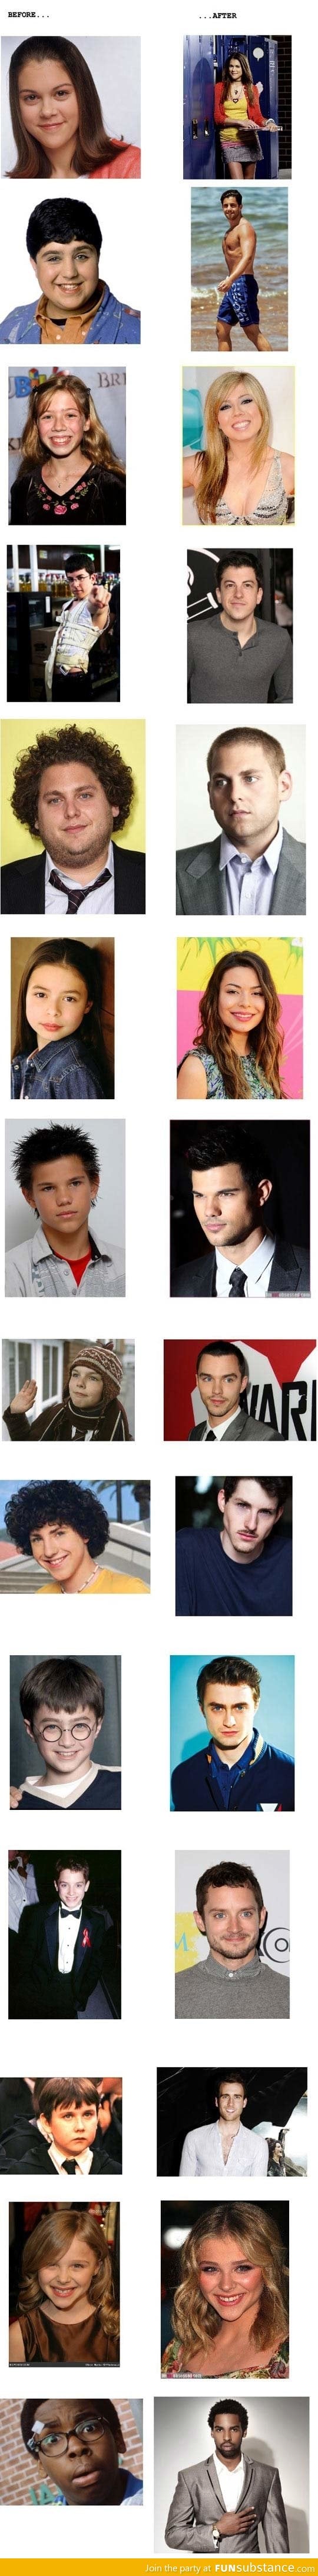 Oh puberty